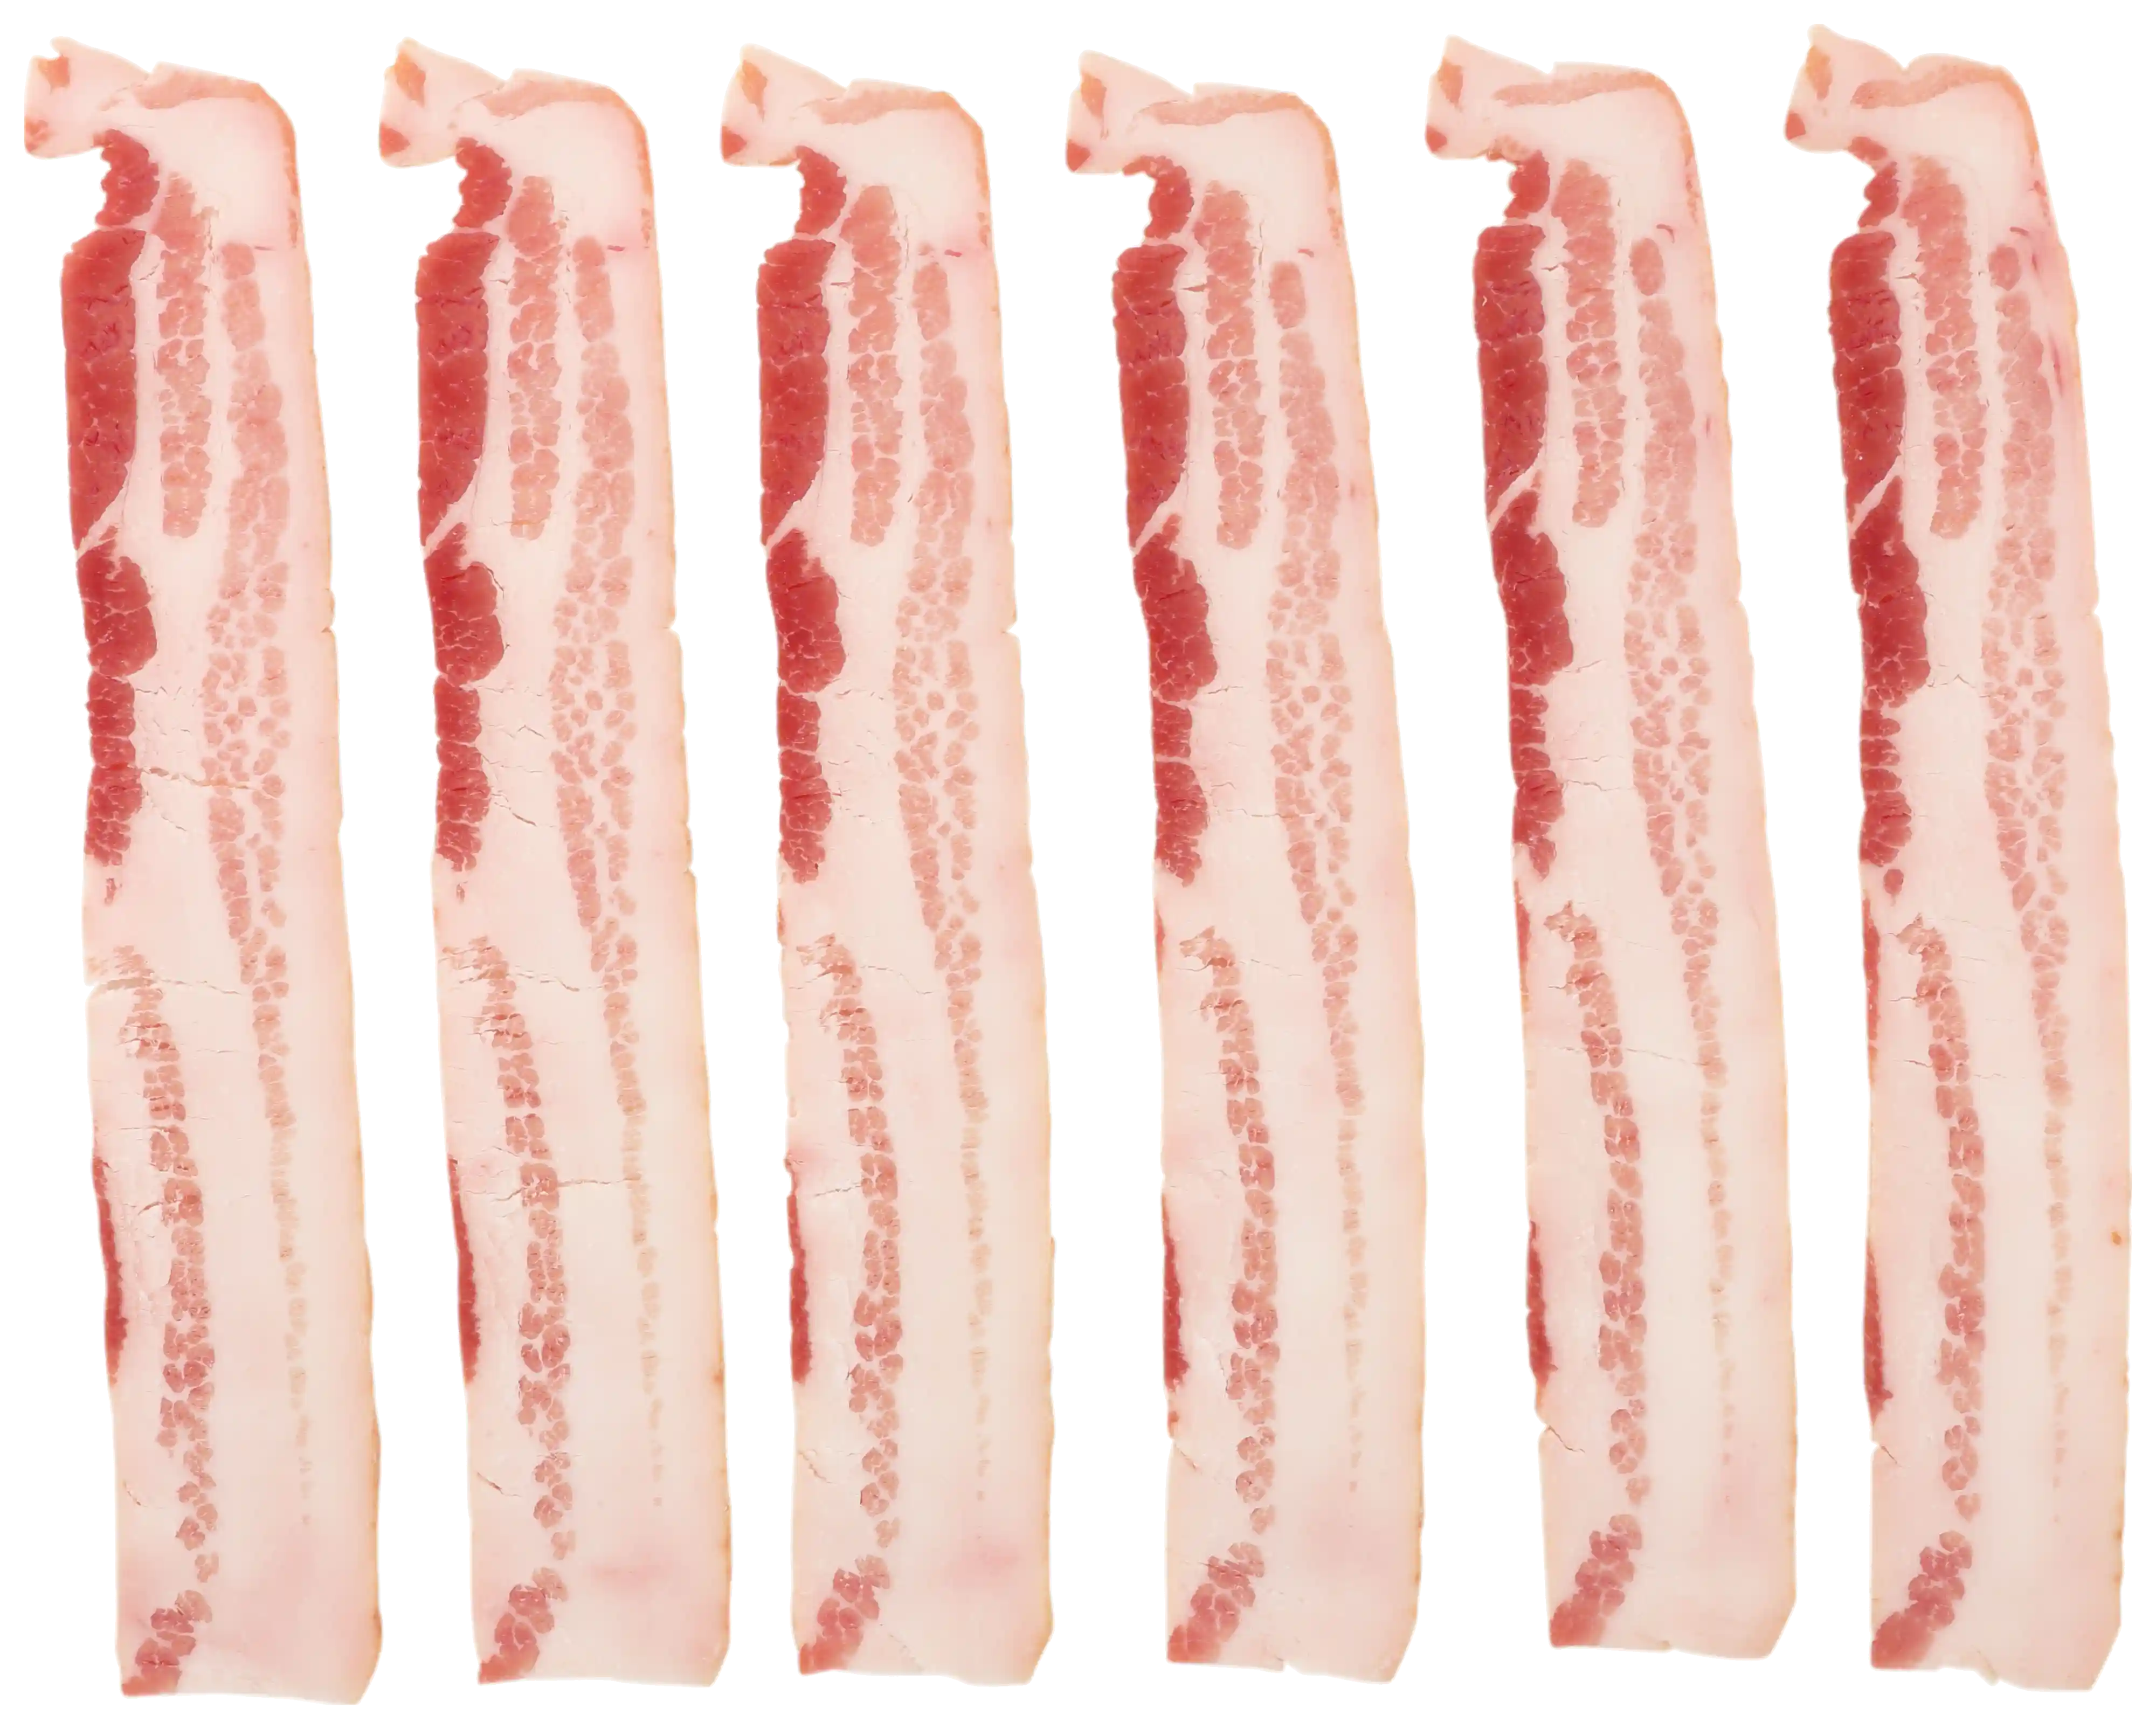 Wright® Brand Naturally Applewood Smoked Thick Sliced Bacon, Flat-Pack®,  15 Lbs, 10-14 Slices per Pound, Frozen_image_21